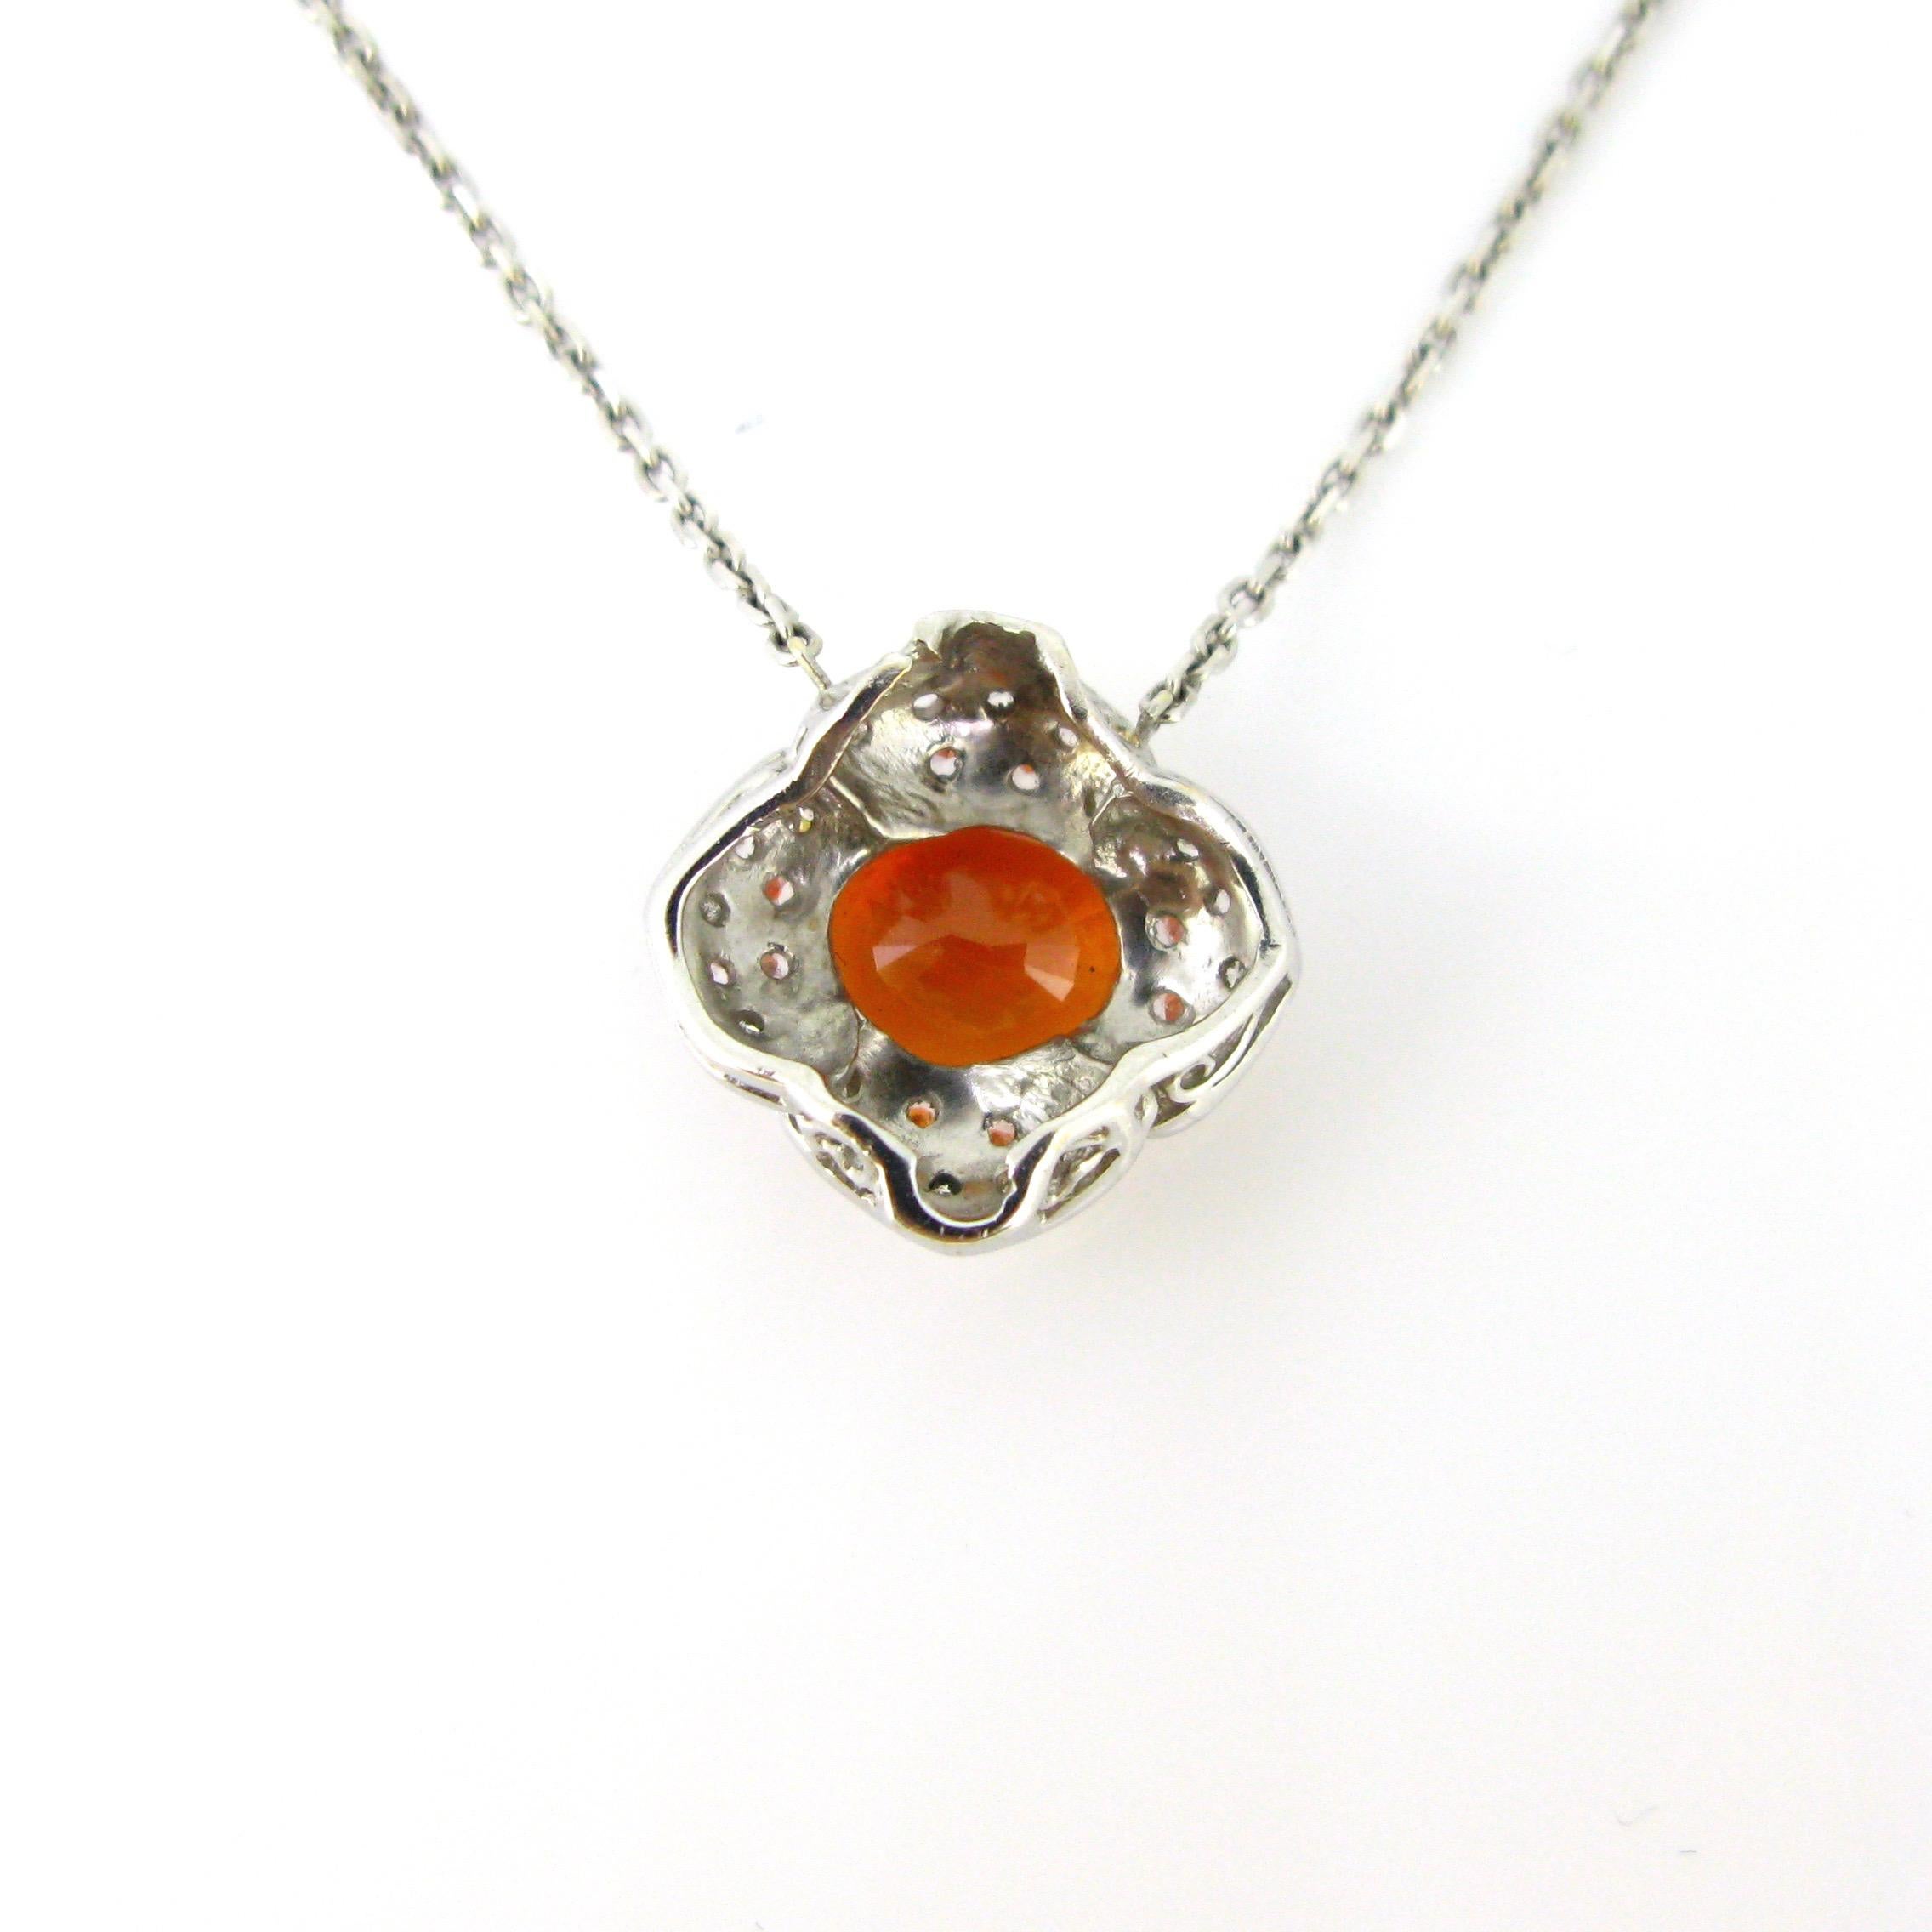 This necklace is made in 18k white gold. The pendant is set with a vivid orange sapphire weighing around 3.90ct. It is surrounded with 4 petals adorned with single cut diamonds. It has a nice flowery design. This necklace is very easy to wear